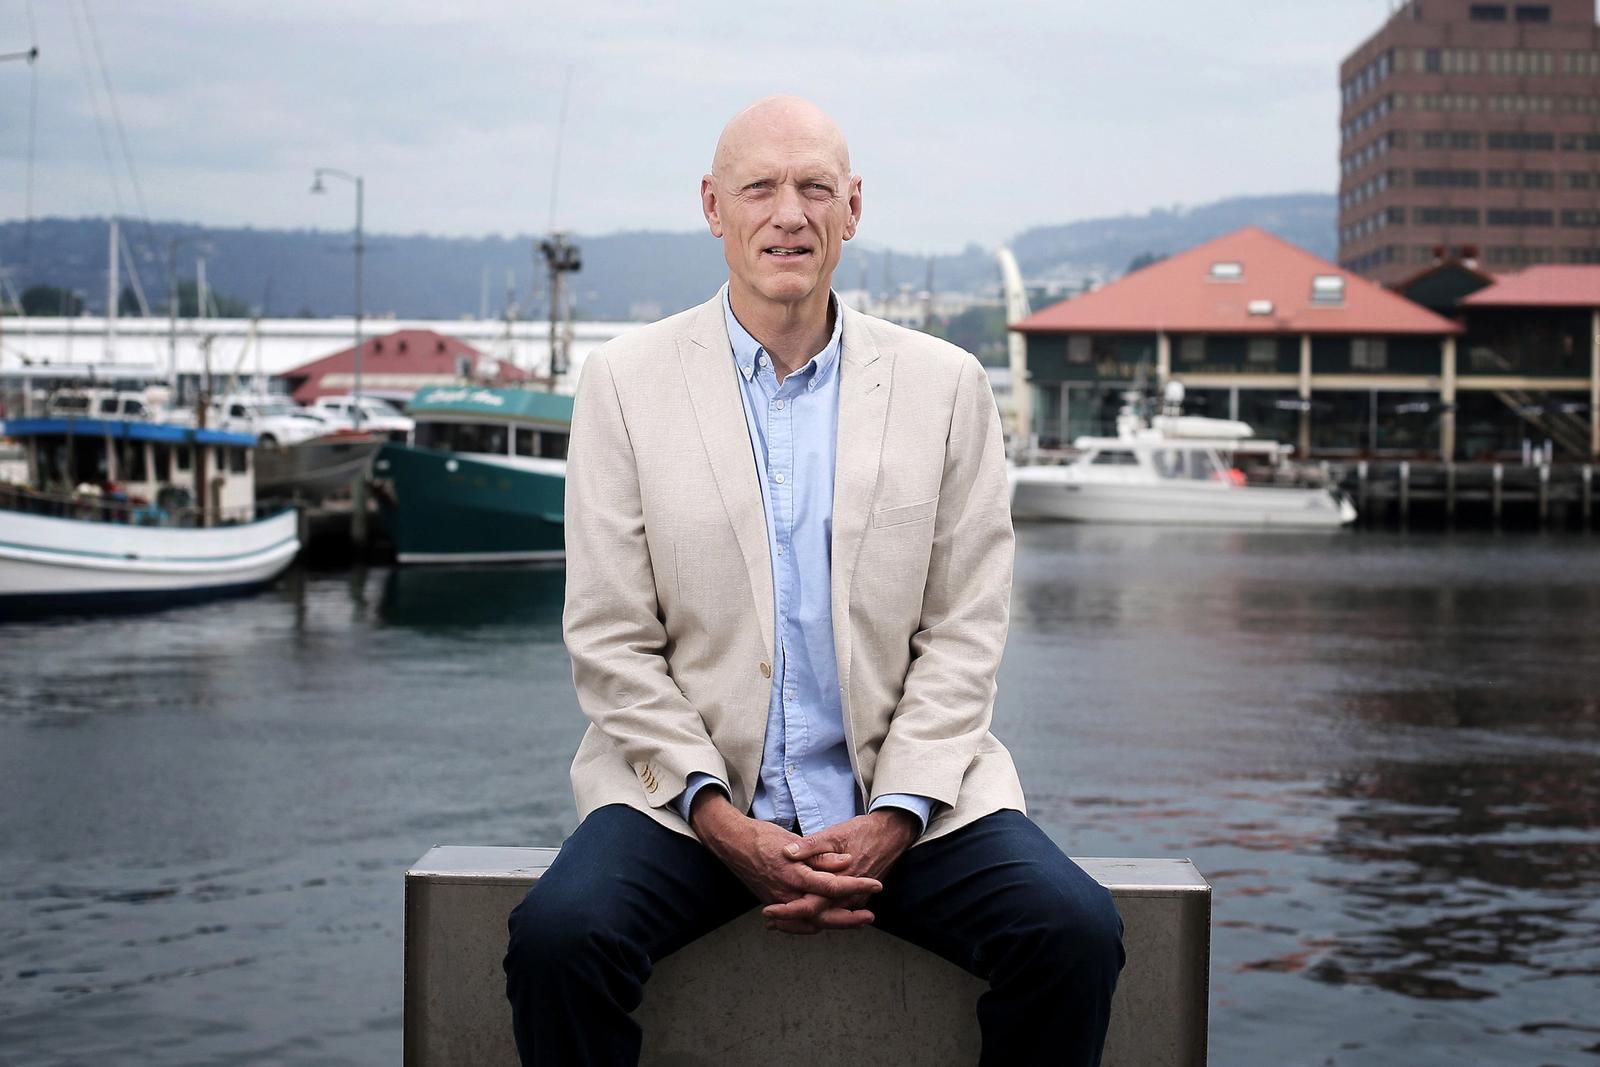 Former musician and politician Peter Garrett in Hobart to launch his new book